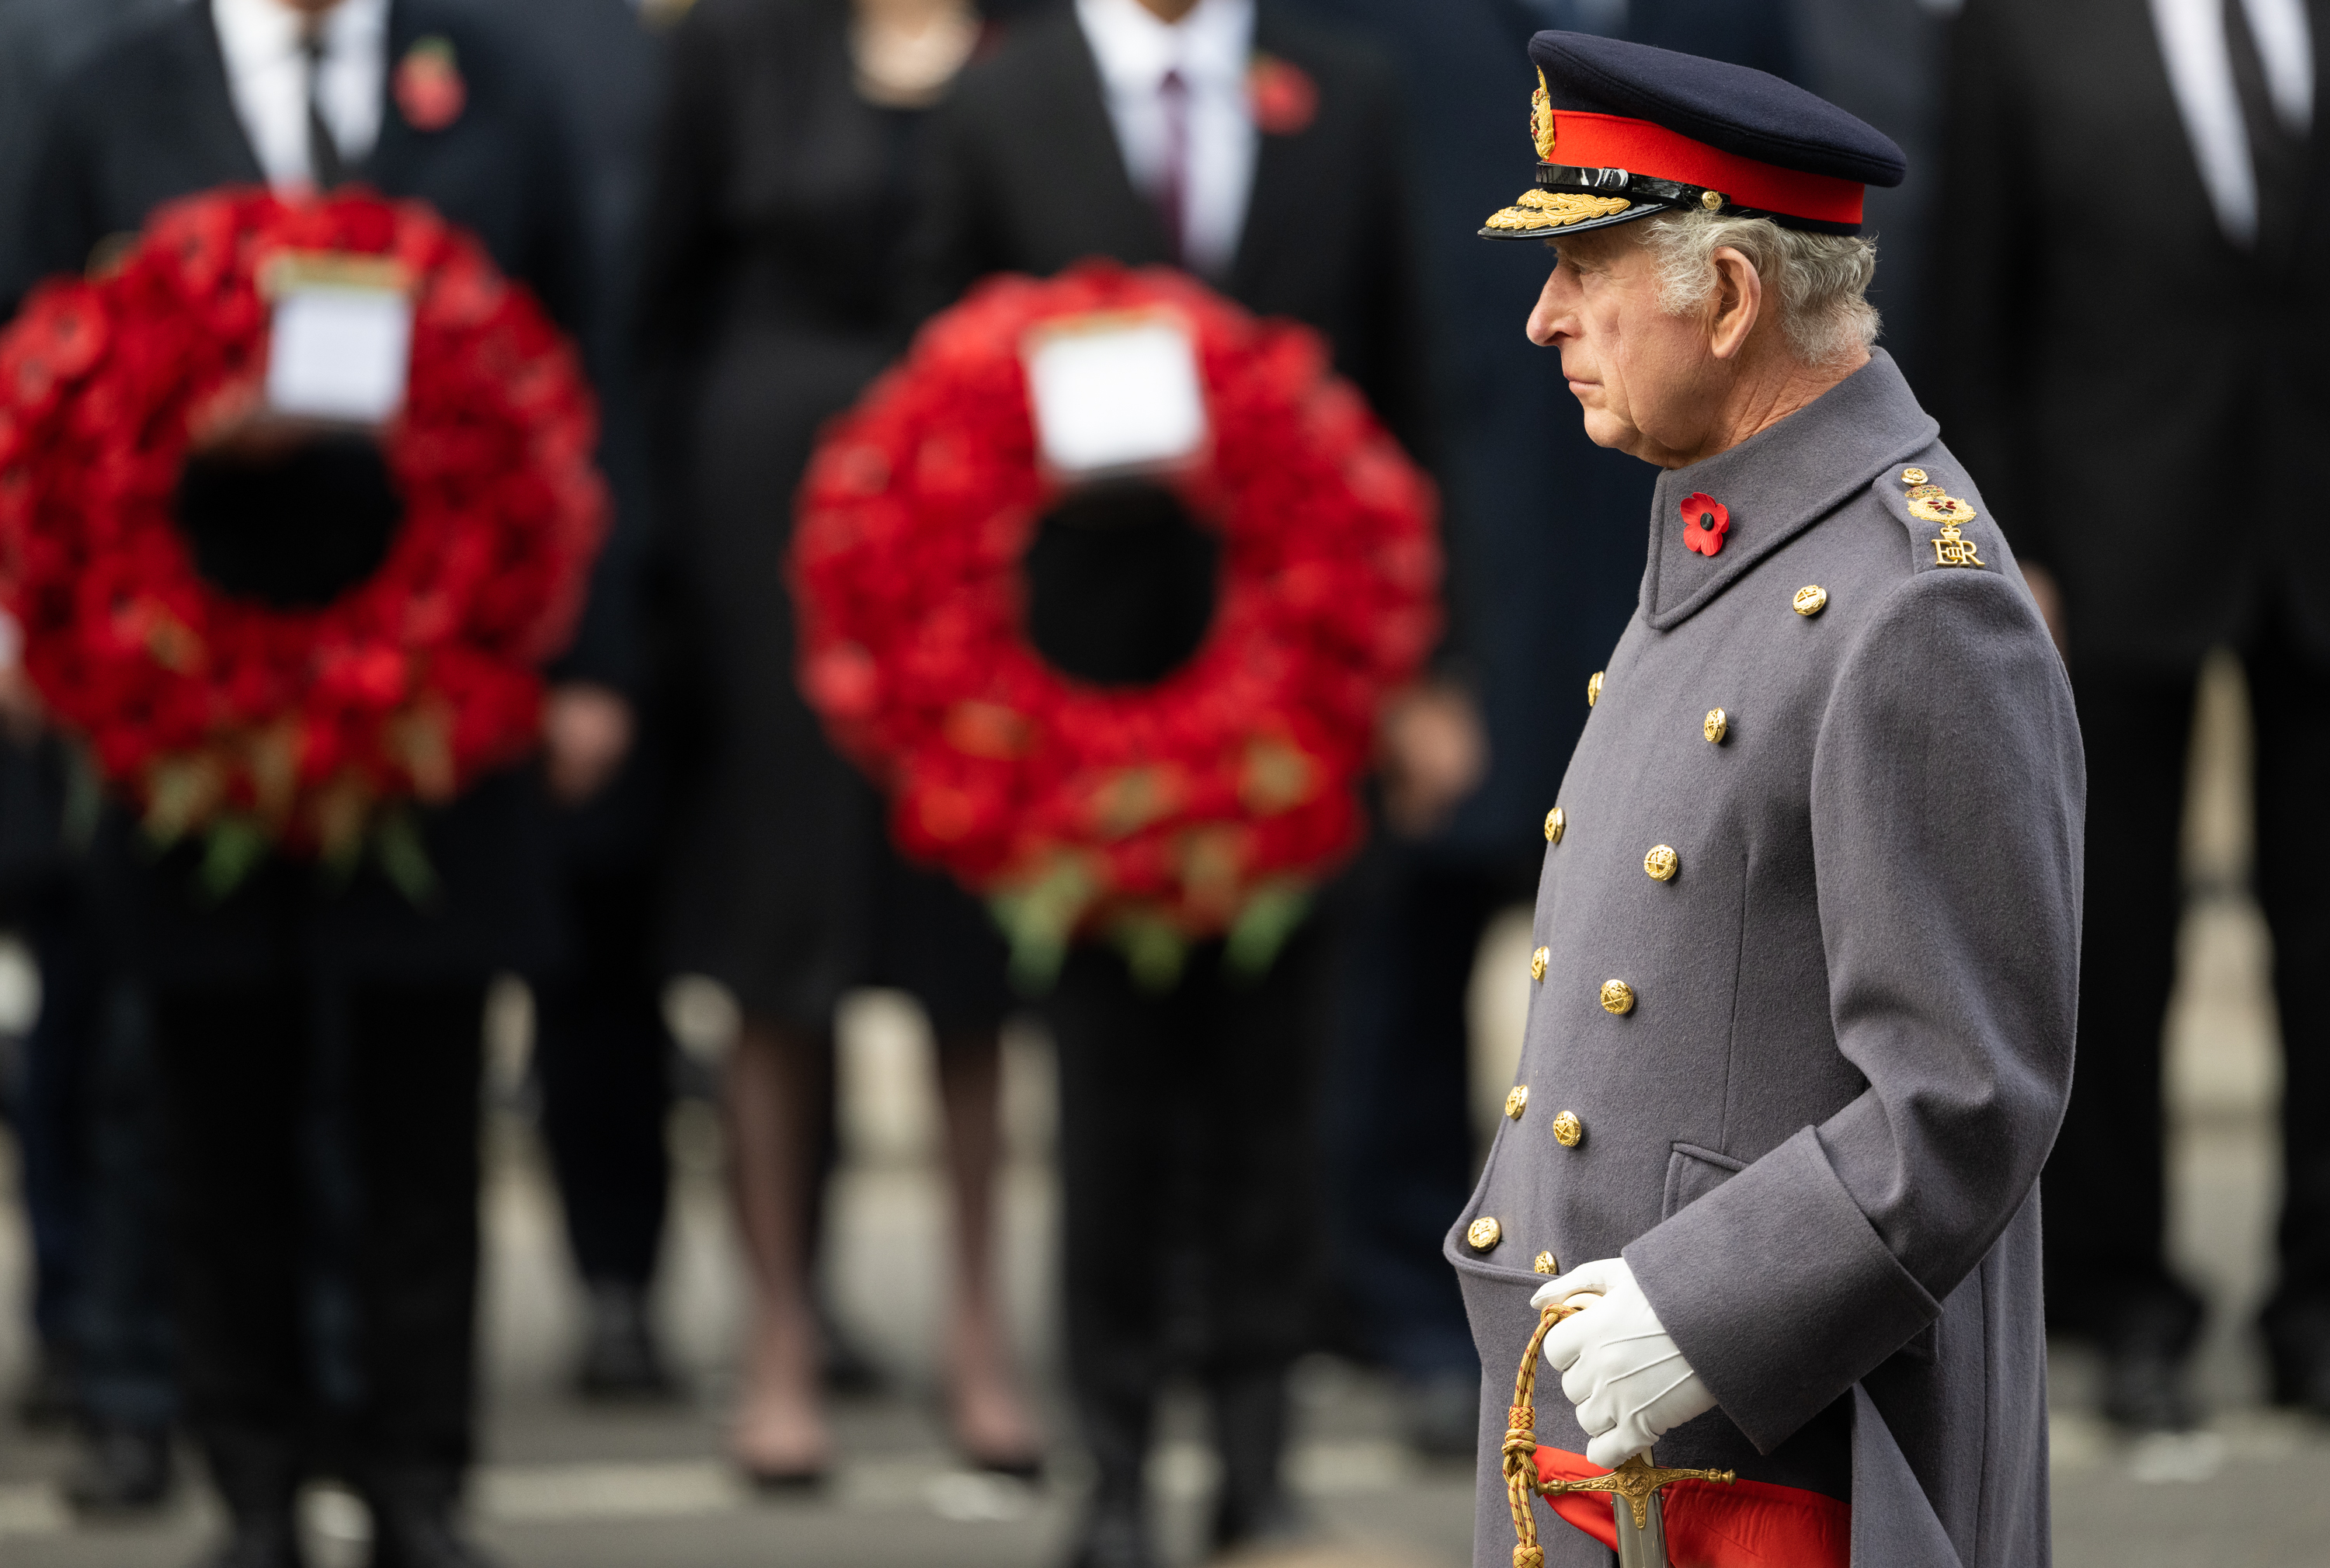 <p>King Charles III is somber as he places a wreath at The Cenotaph during the National Service of Remembrance in London on Nov. 13, 2022 -- his first Day of Remembrance ceremony as sovereign. Remembrance Sunday honors British and Commonwealth military and civilian servicemen and women in both WWI and WWII as well as later conflicts.</p>